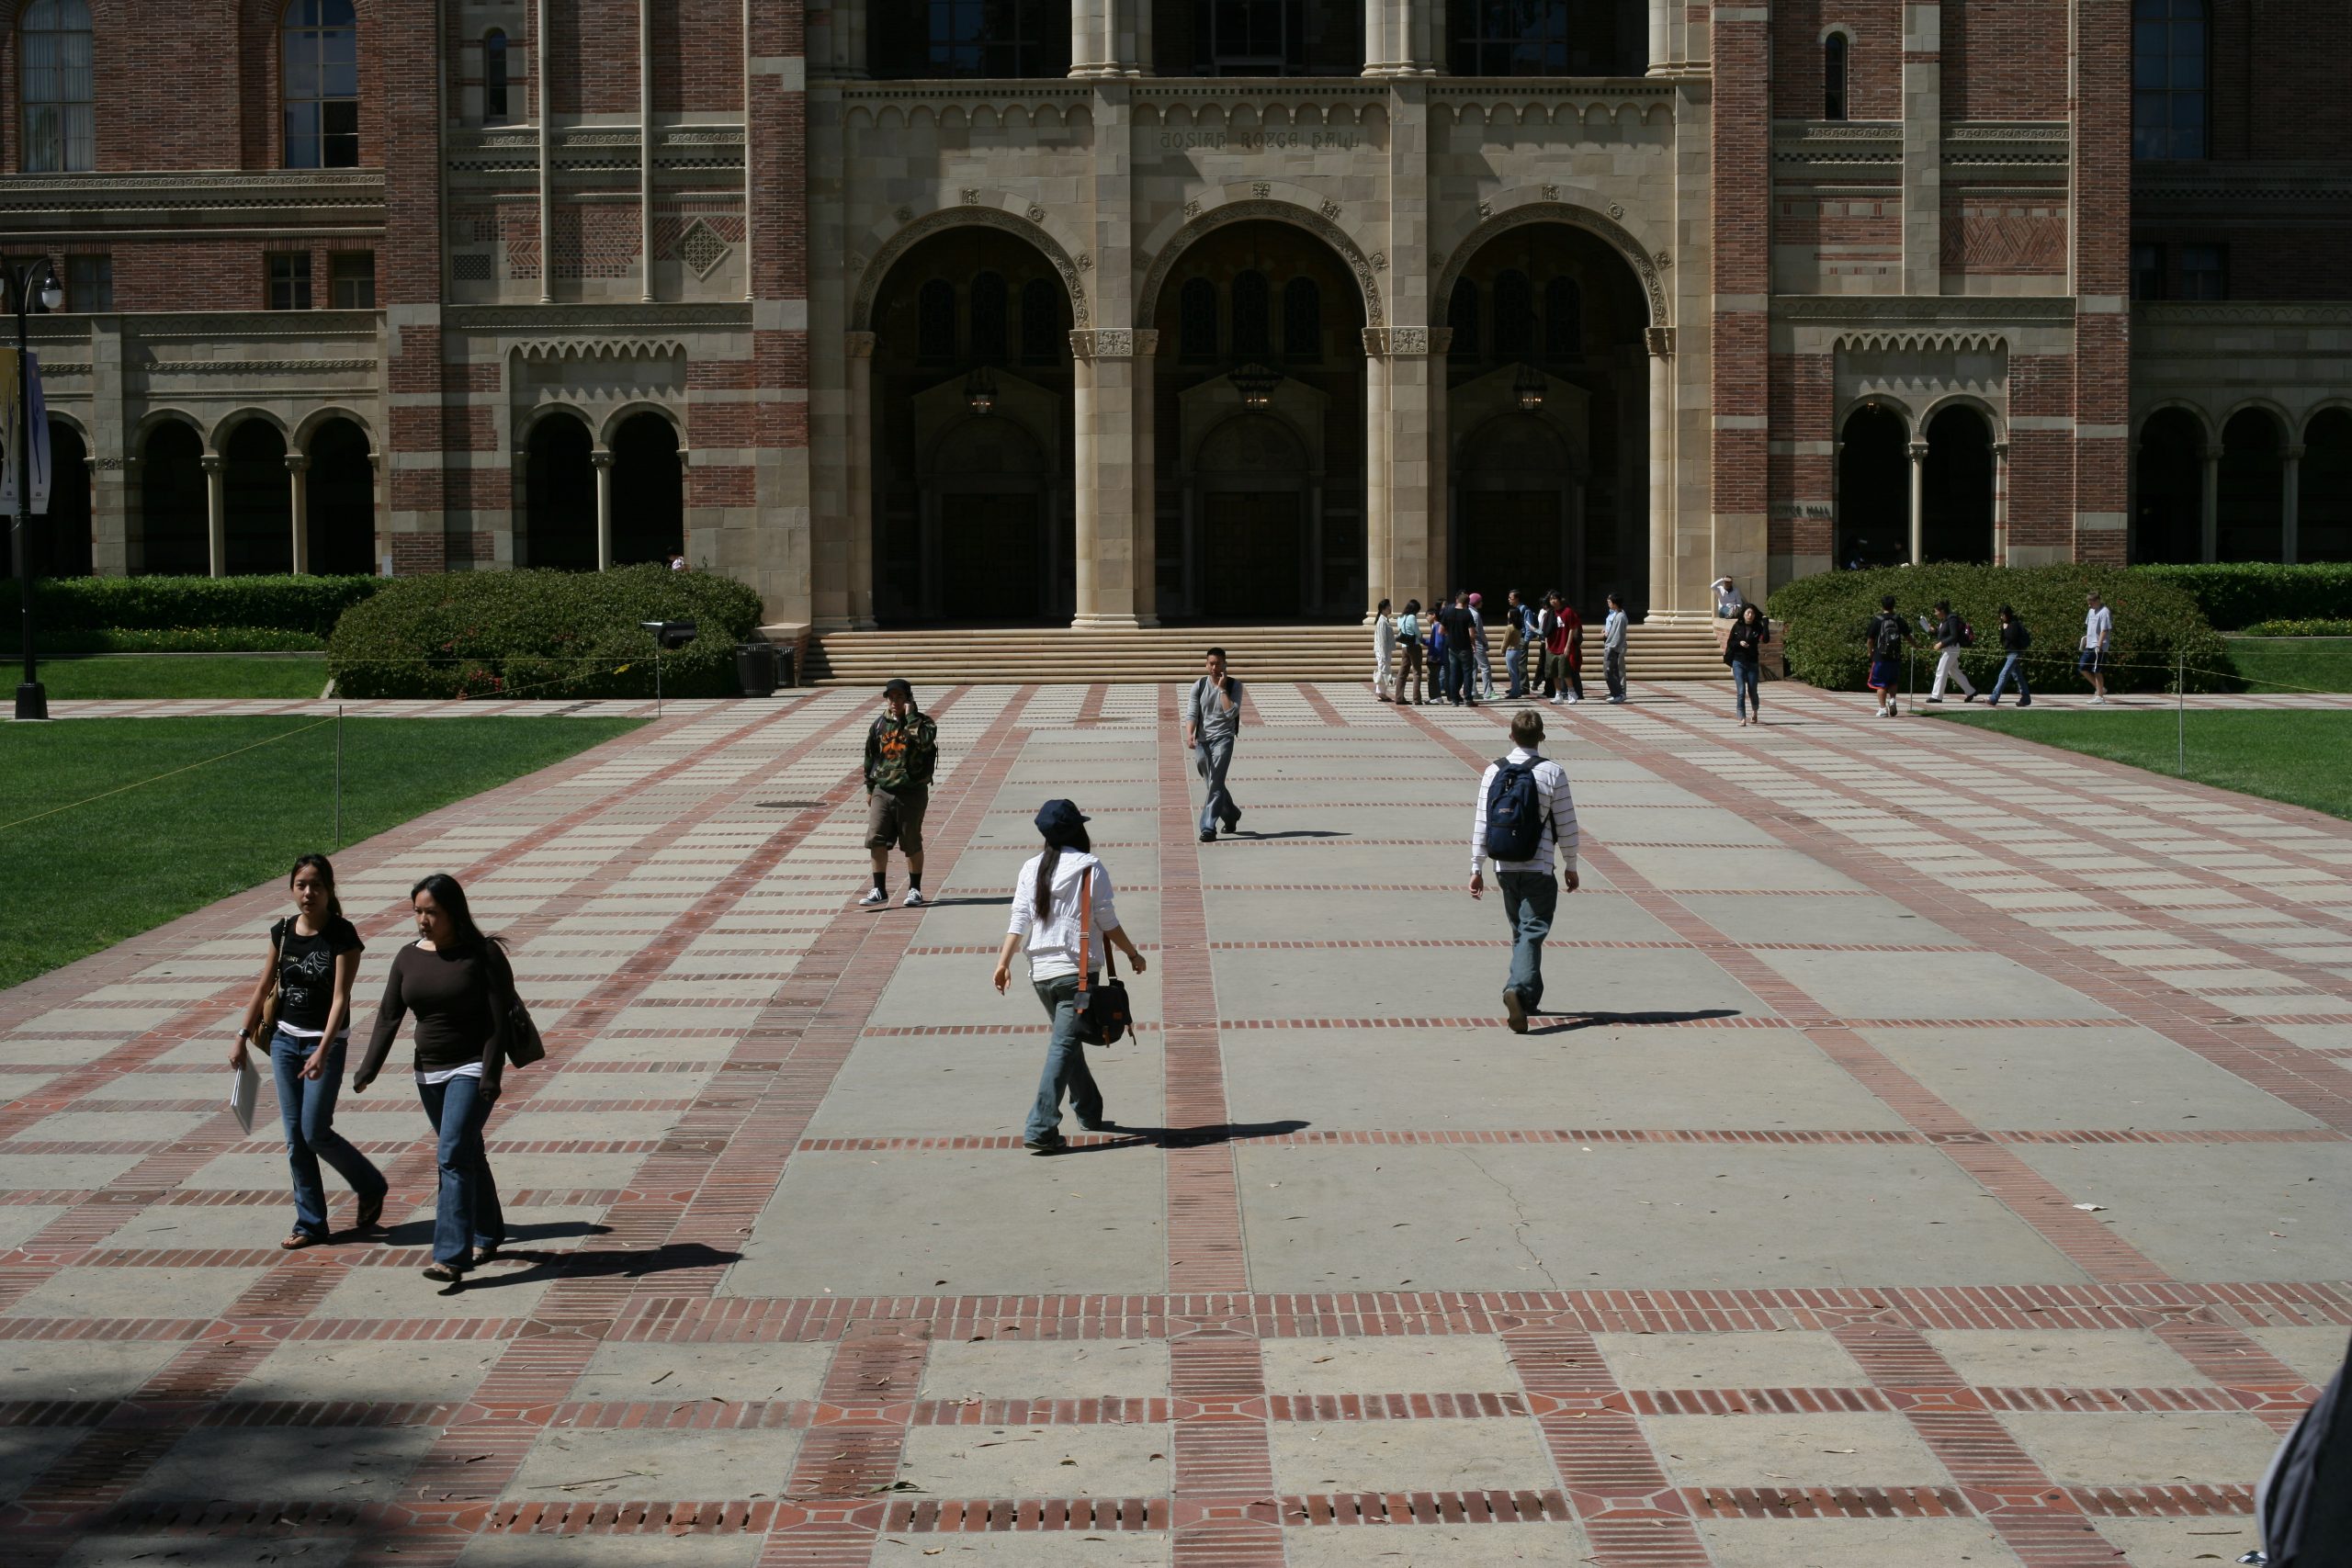 Two signature elements of UCLA architecture are rounded roman arches (here seen on the facade of Royce Hall) and pathways delineated by rows of bricks